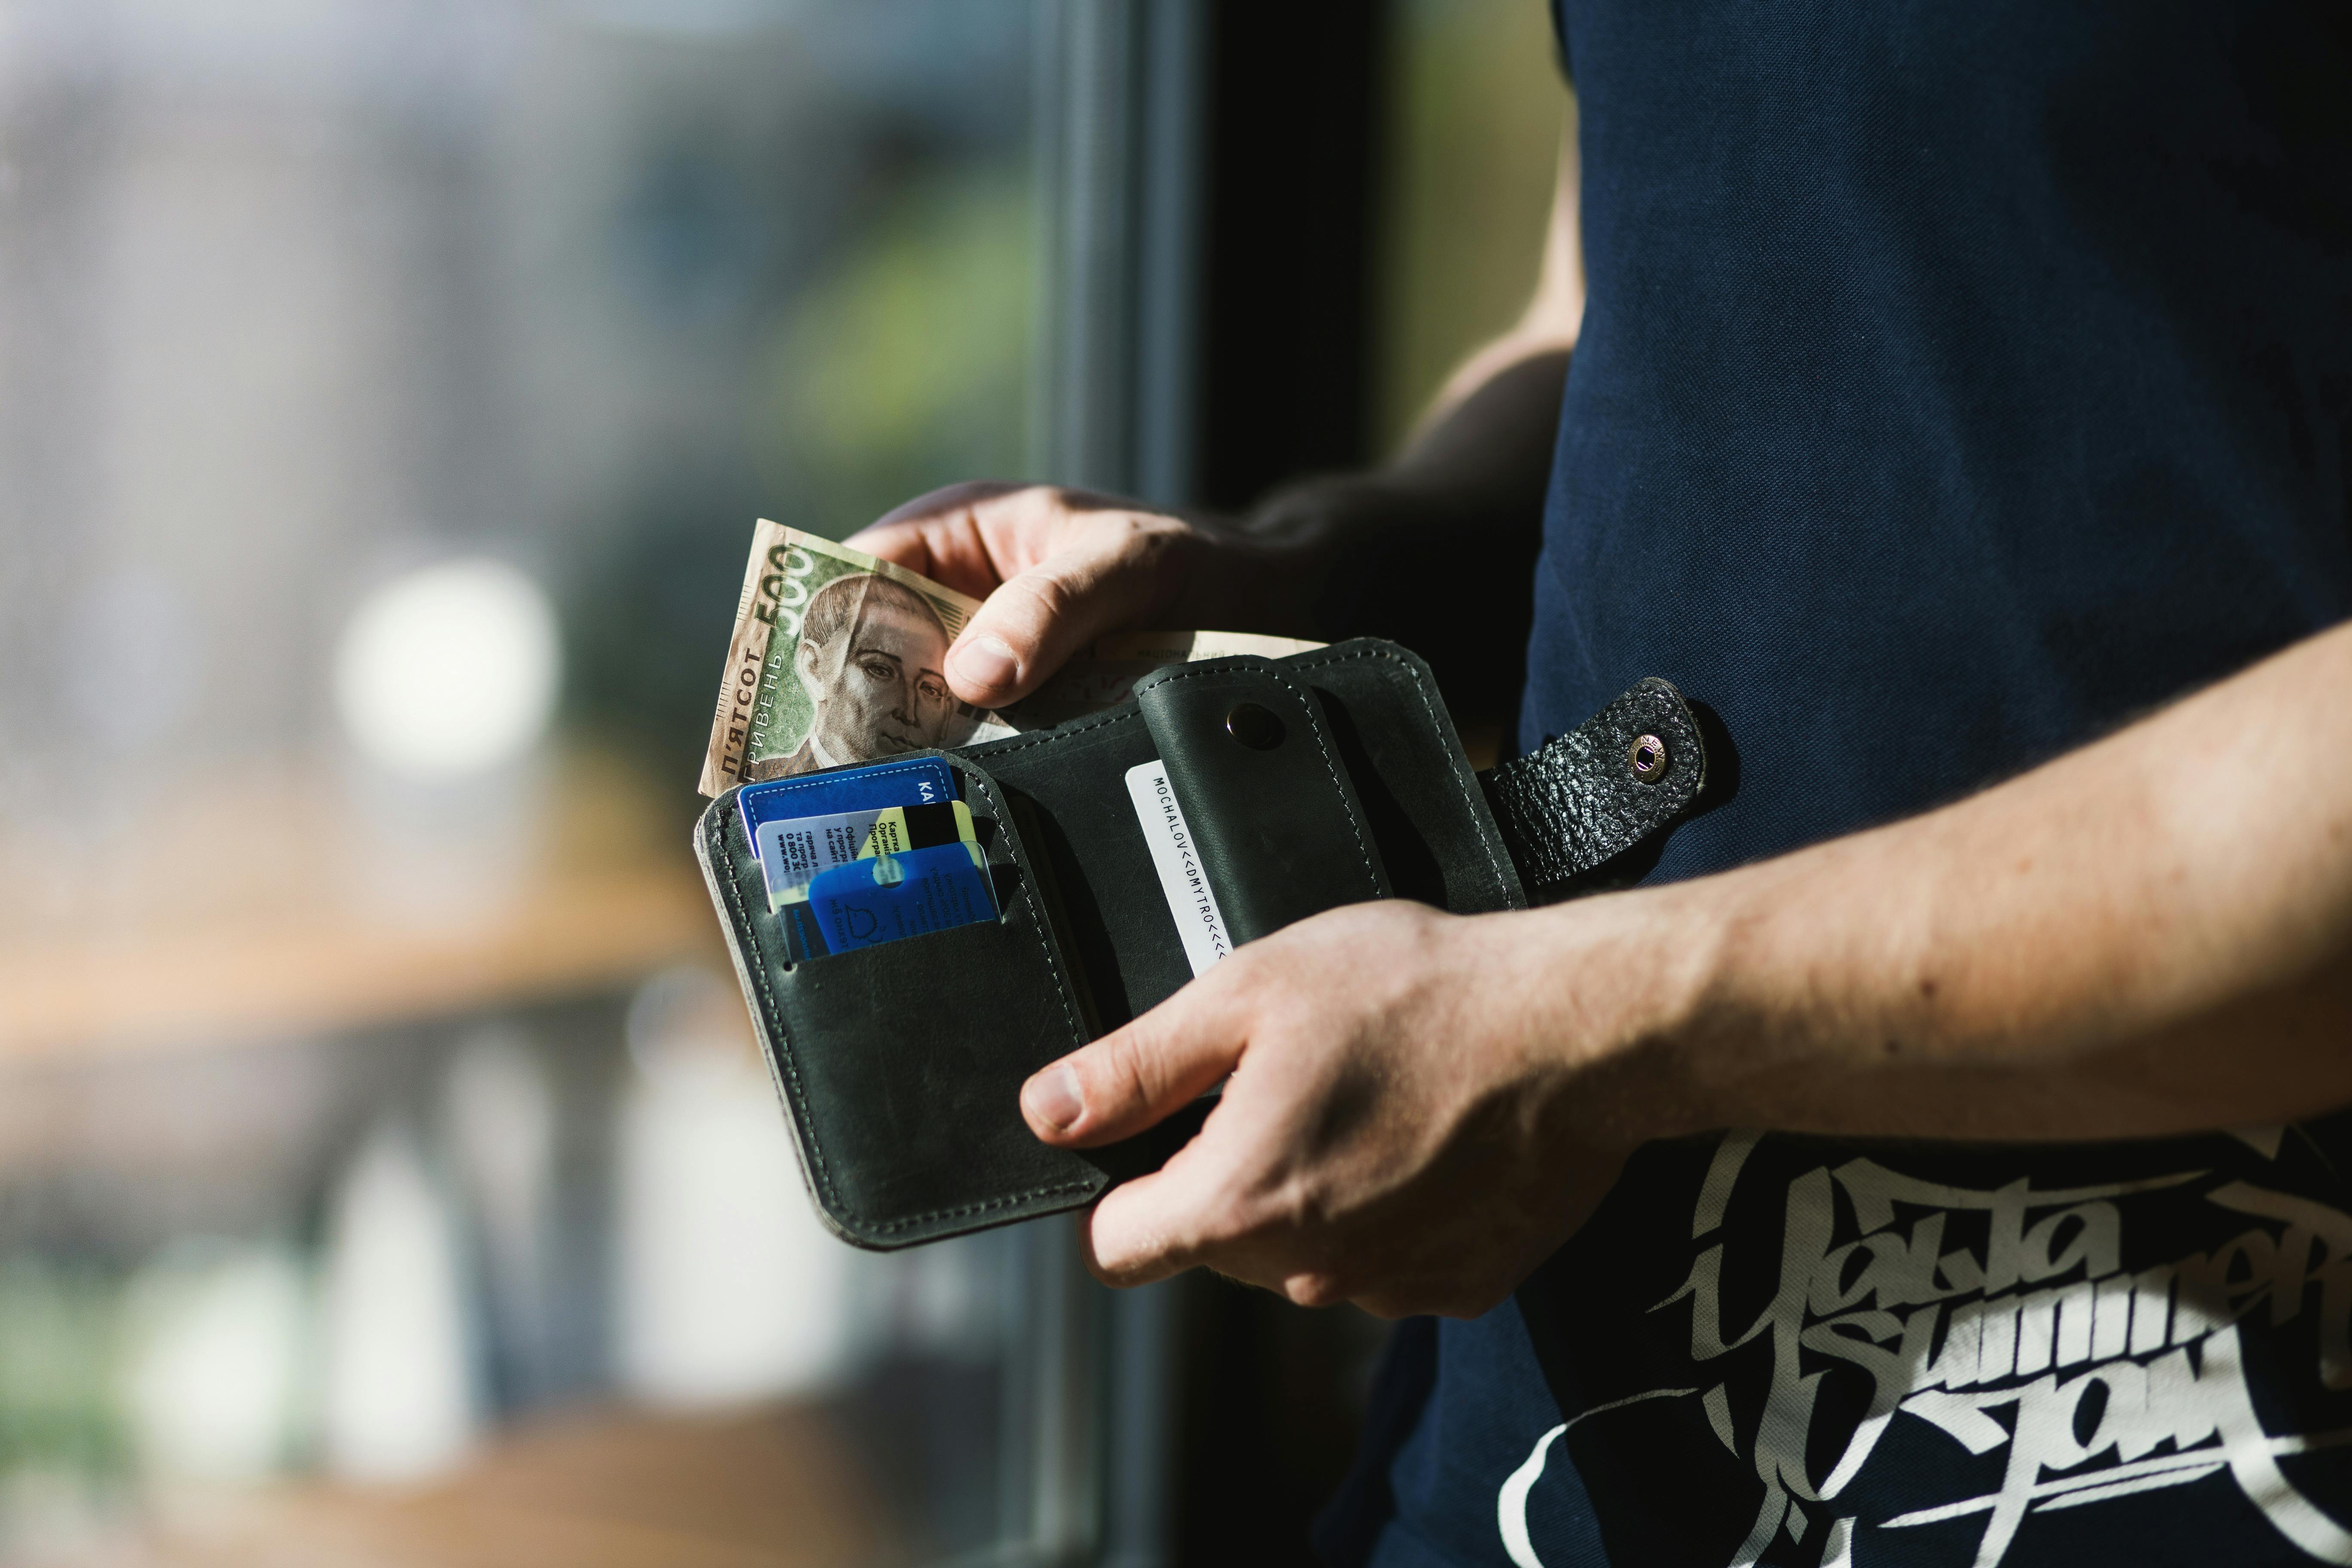 Photograph of Person Holding Black Leather Wallet with Money \u00b7 Free Stock Photo